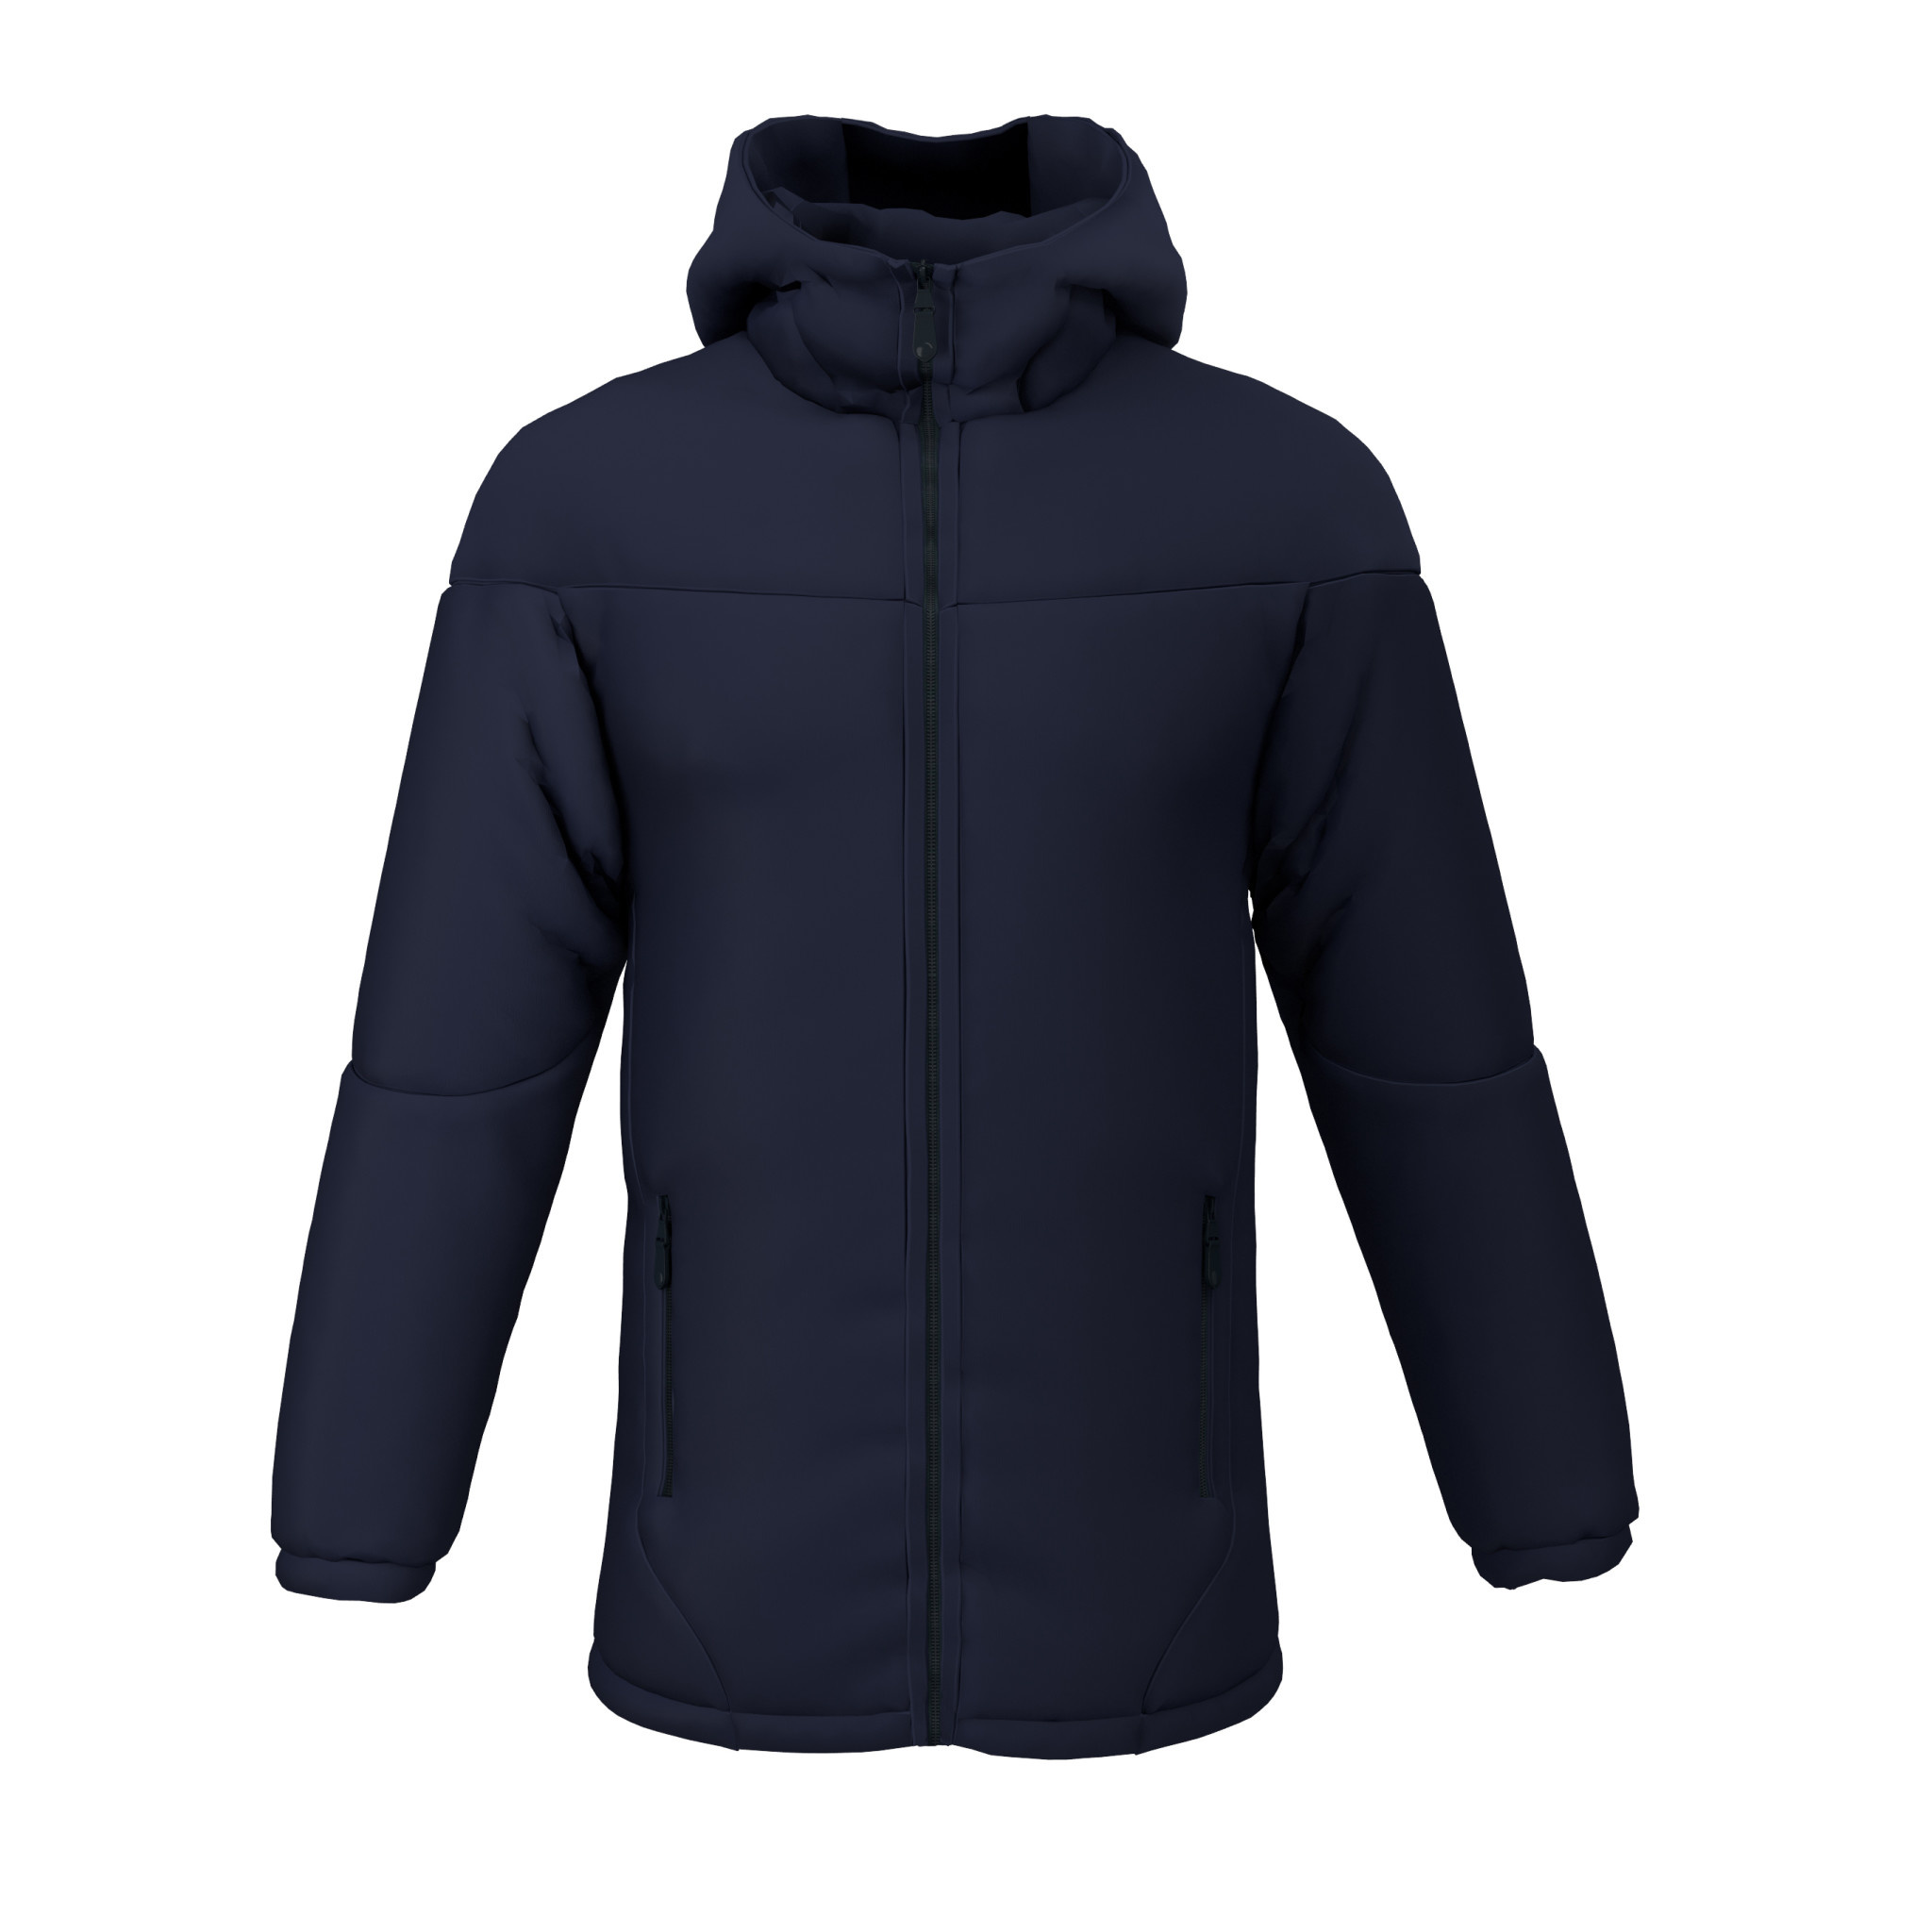 Adults Thermal Contour Jacket